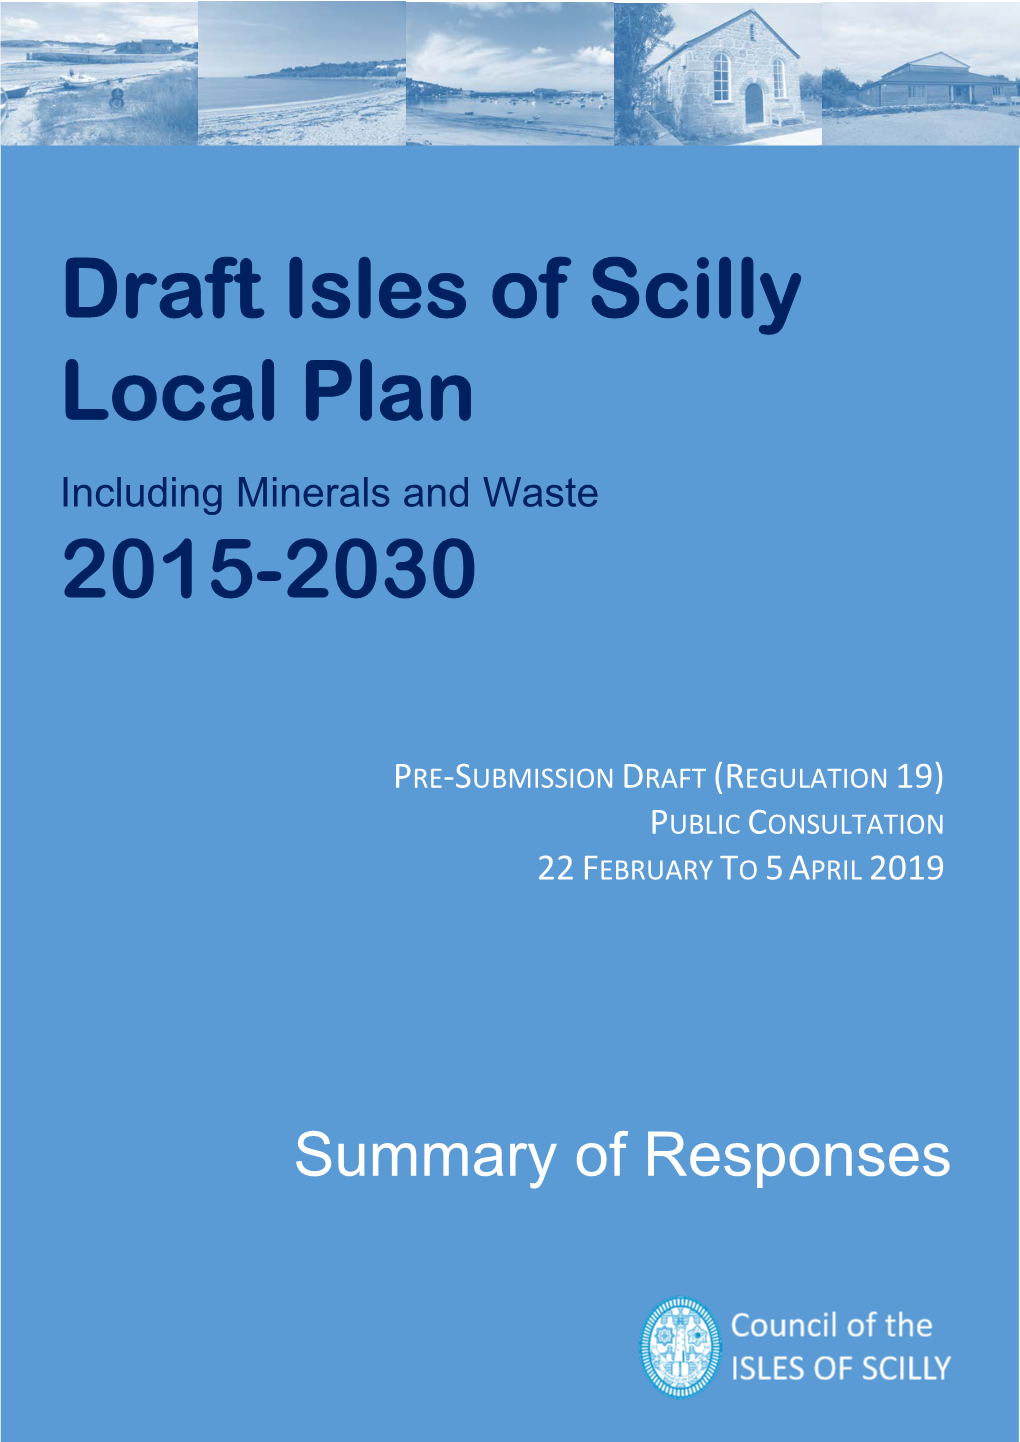 Draft Isles of Scilly Local Plan 2015-2030